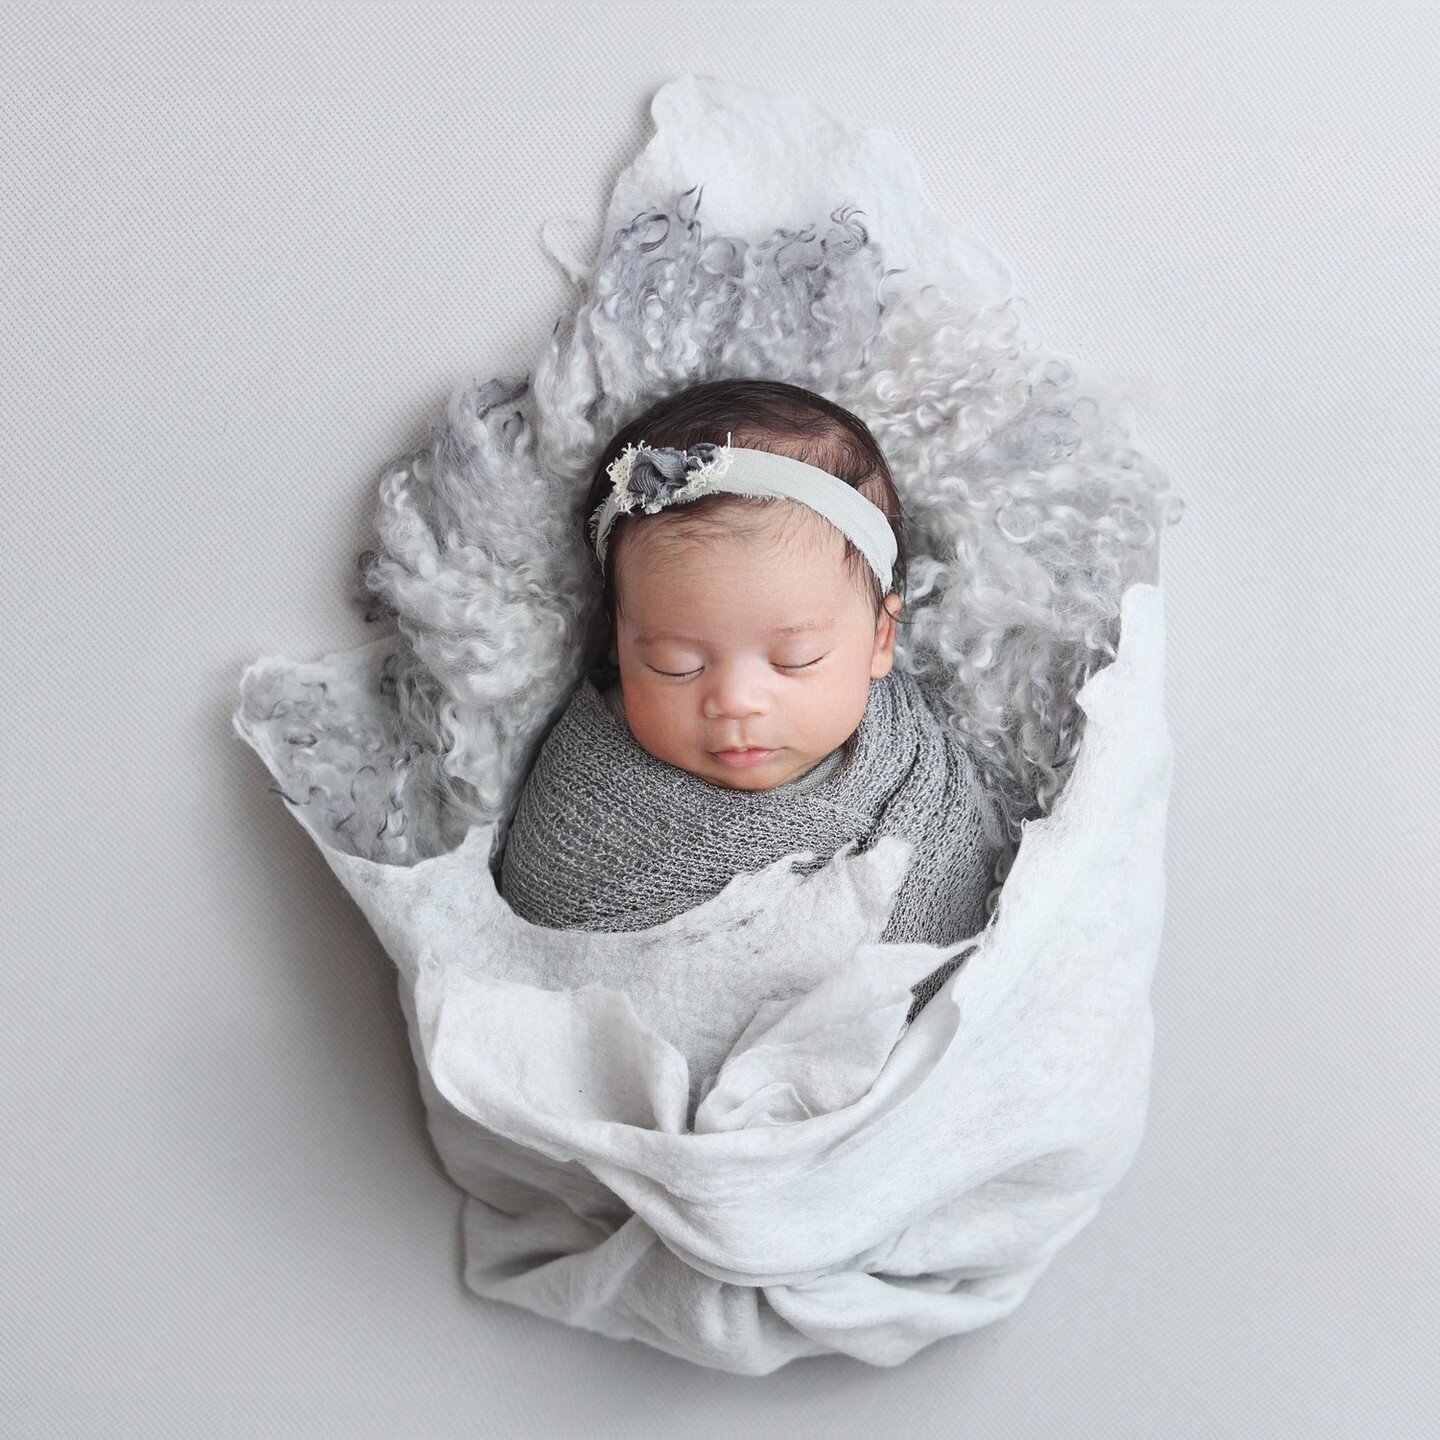 So beautiful is this baby photographed by our associate Renata. Need a newborn session? Our associates are trained with the best lighting and props on thr market. In studio or in home. Visit the website to book. We work with the tinest humans on the 